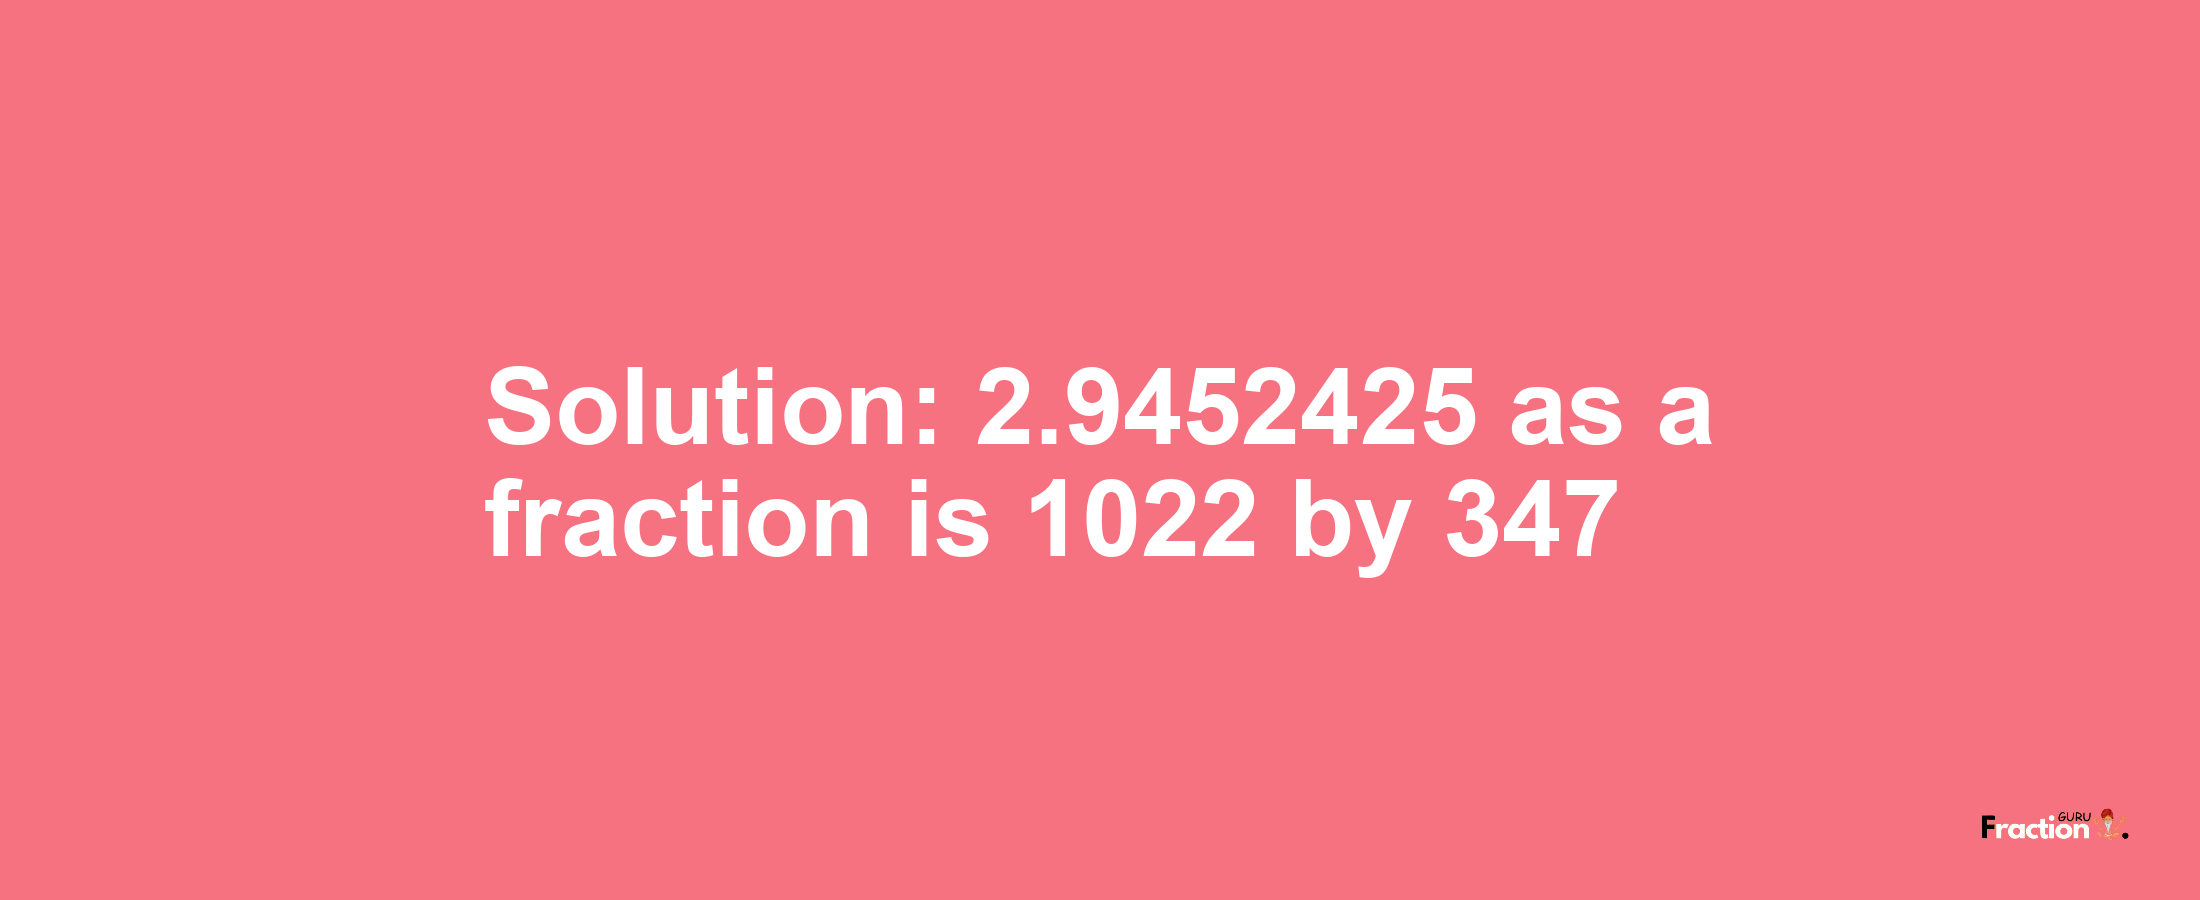 Solution:2.9452425 as a fraction is 1022/347